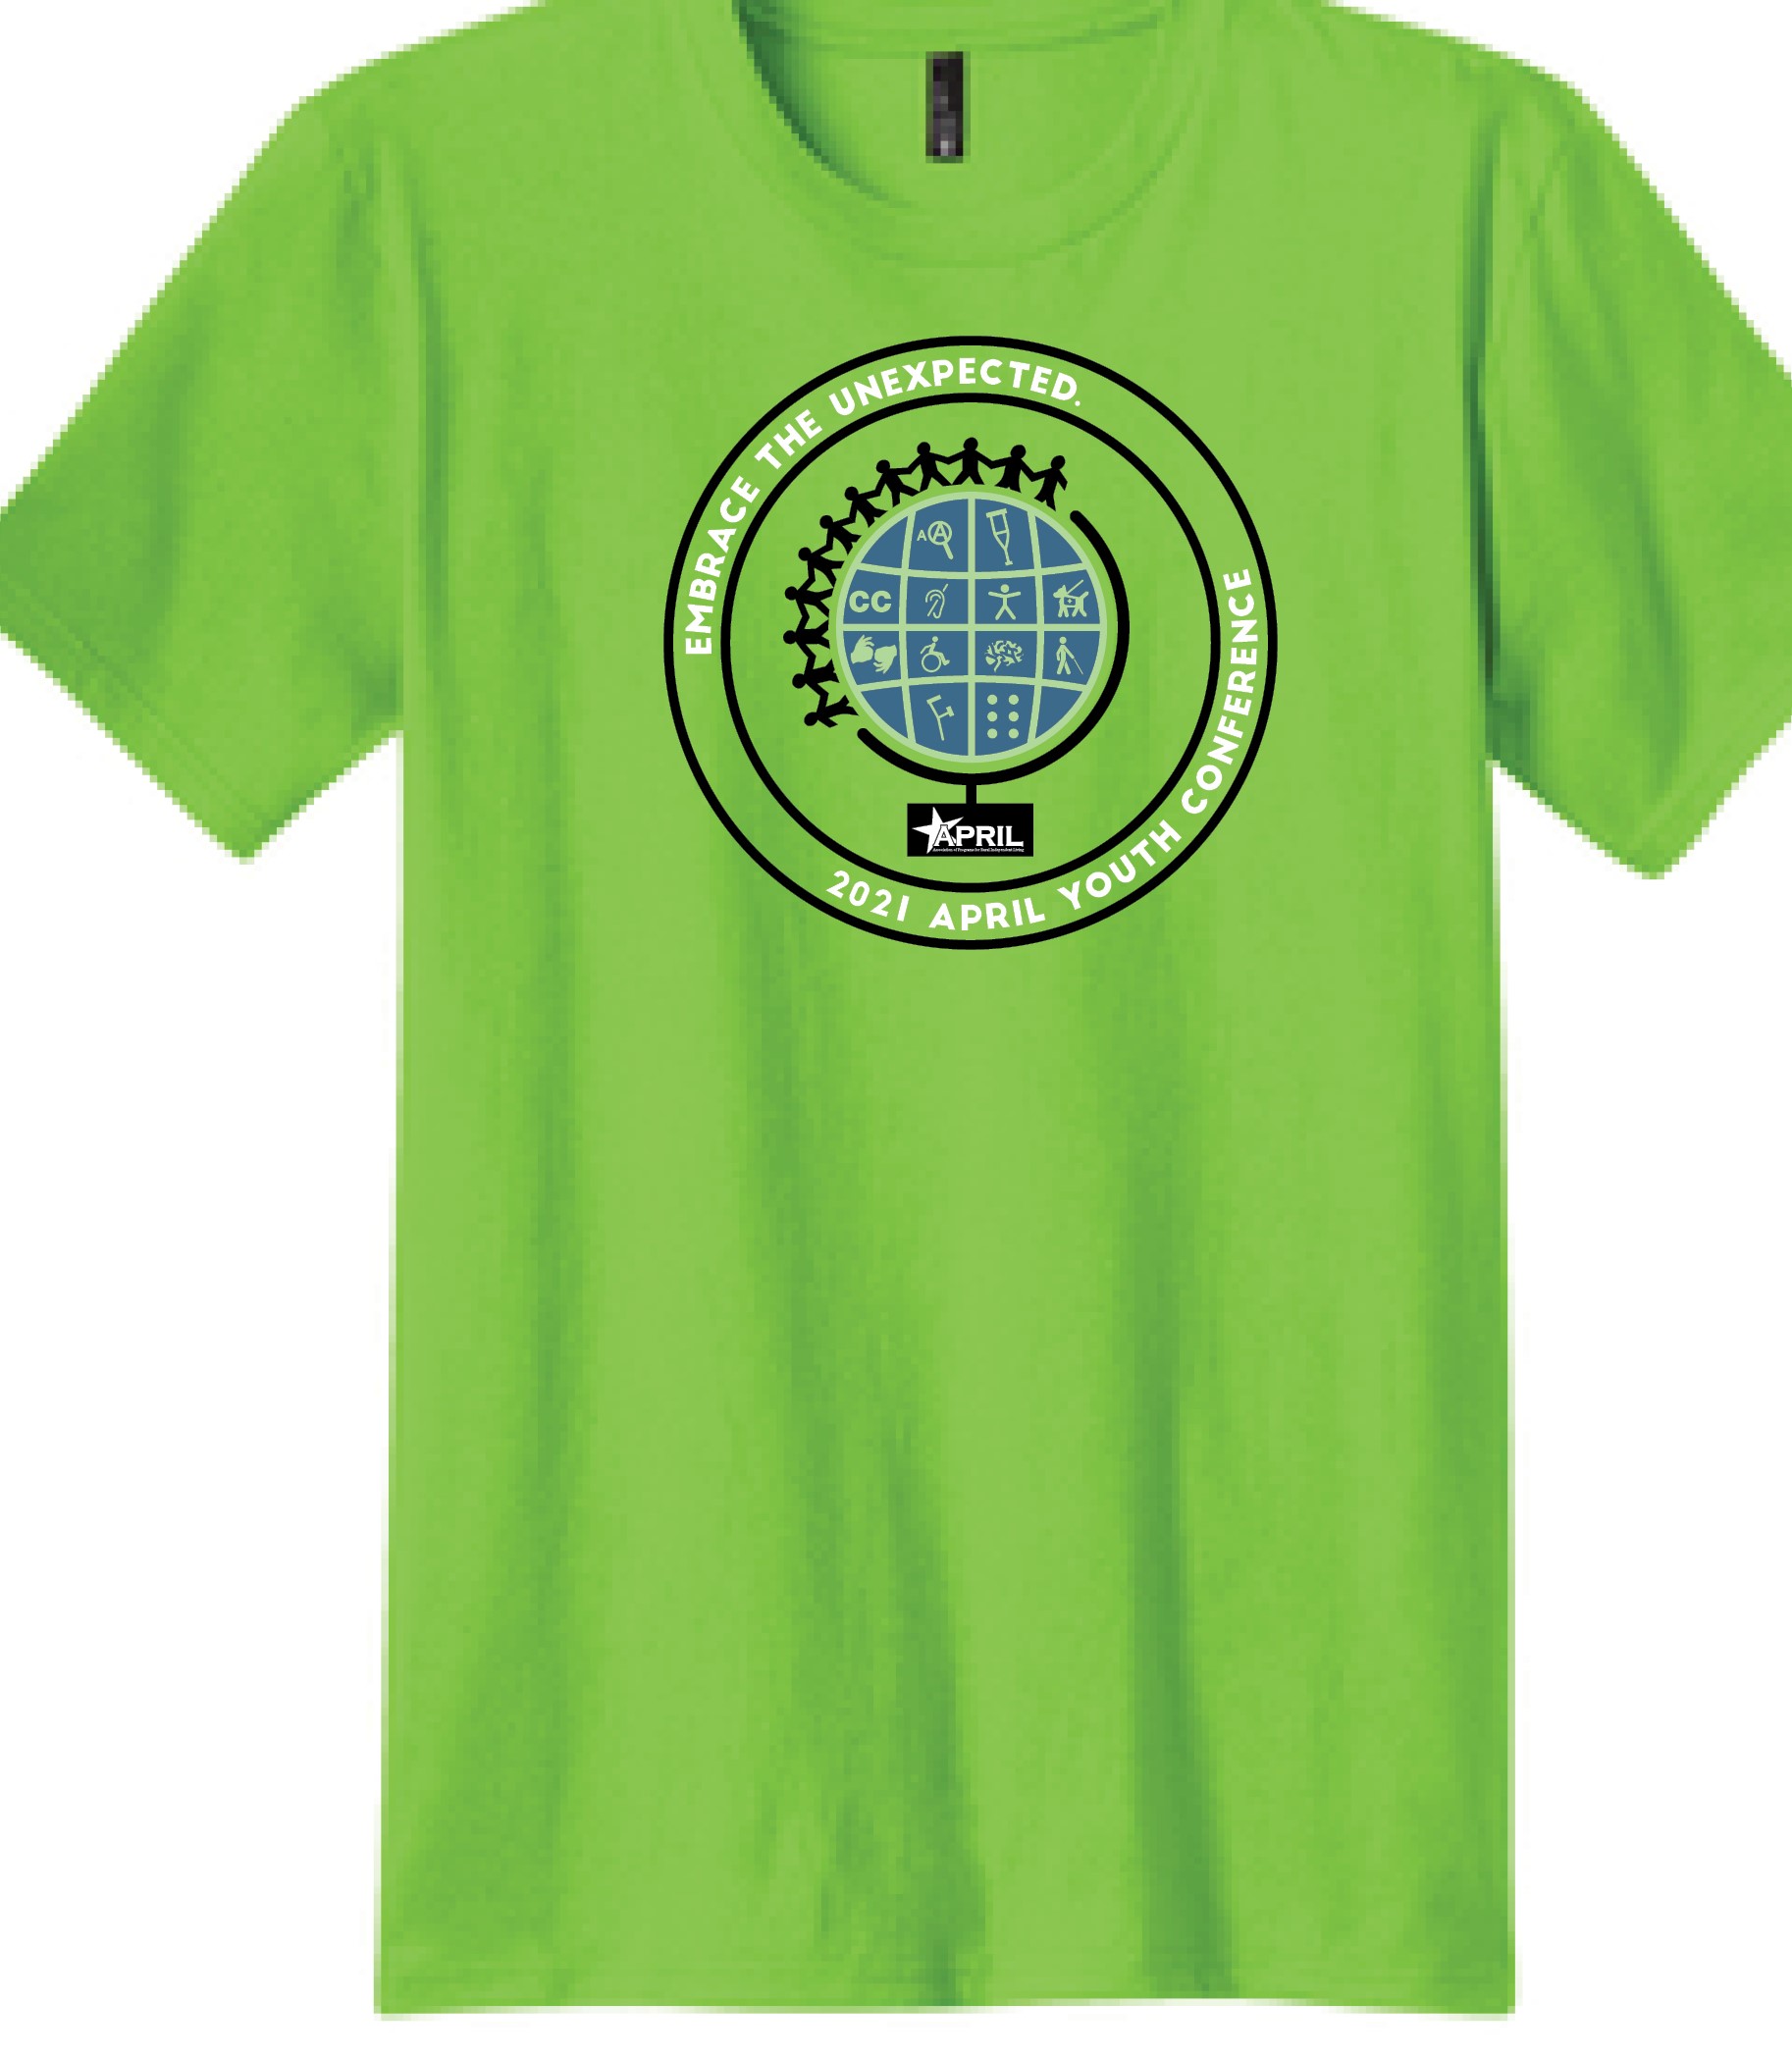 APRIL Youth Green tshirt Embrace the unexpected globe with people standing around the outside